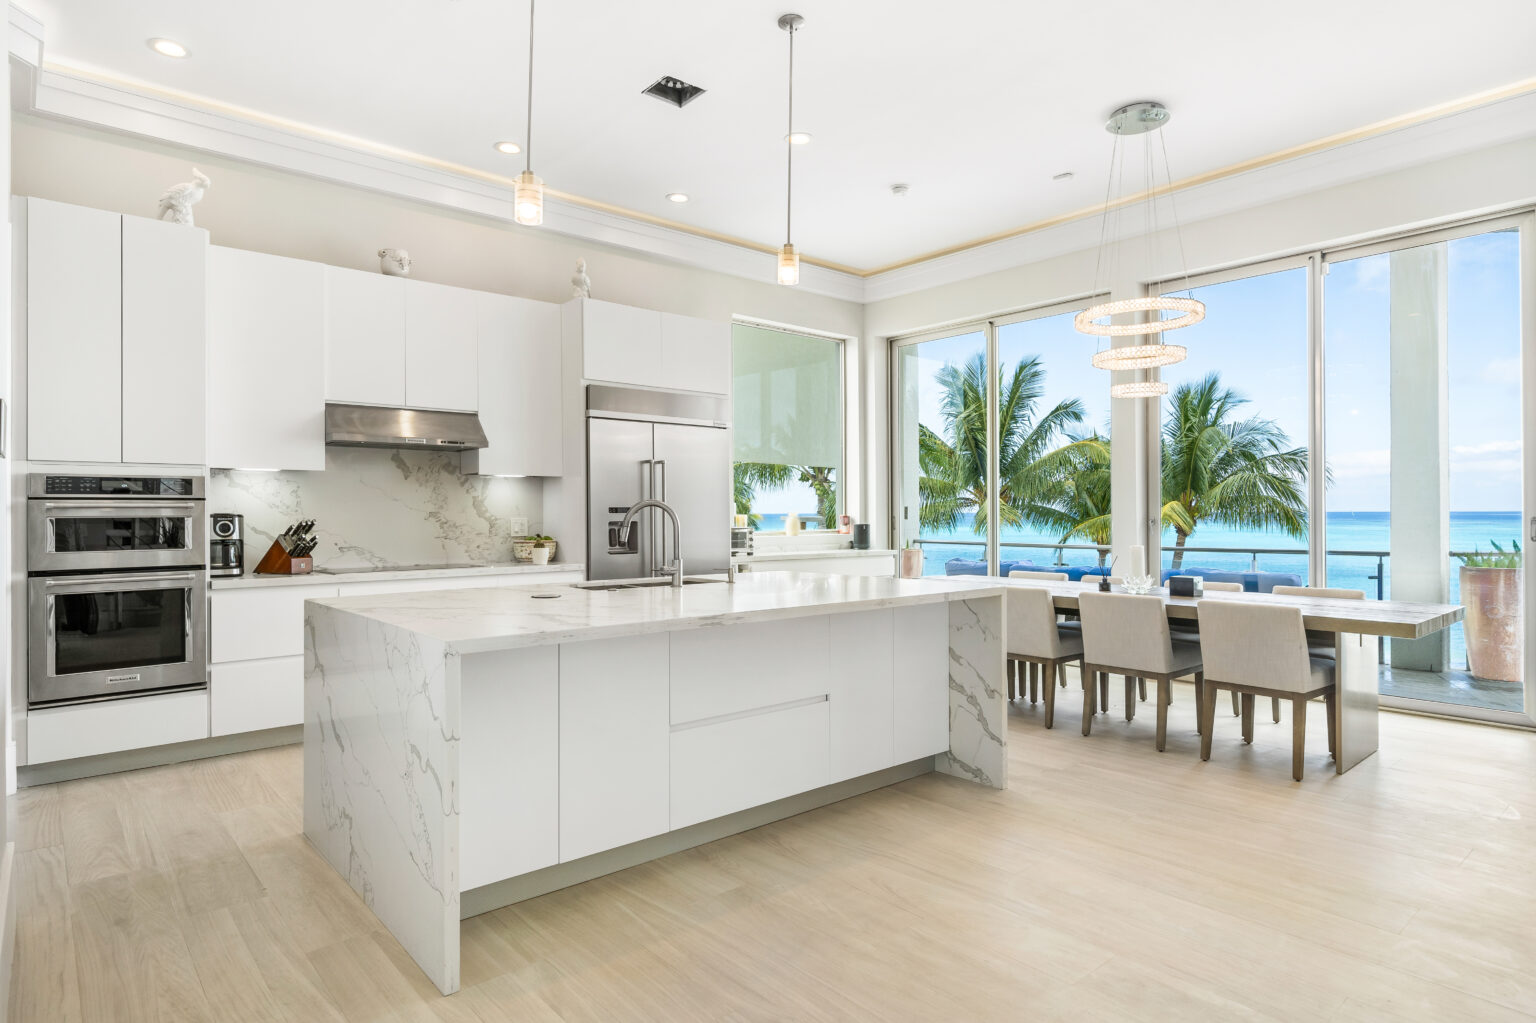 Within the sun-kissed world of Ocean Club Estates, 112 Harbour's Way takes center stage as one of the most unique and architecturally significant homes in the community. Asking $14,750,000. Represented by MAISON Bahamas/Forbes Global Properties.